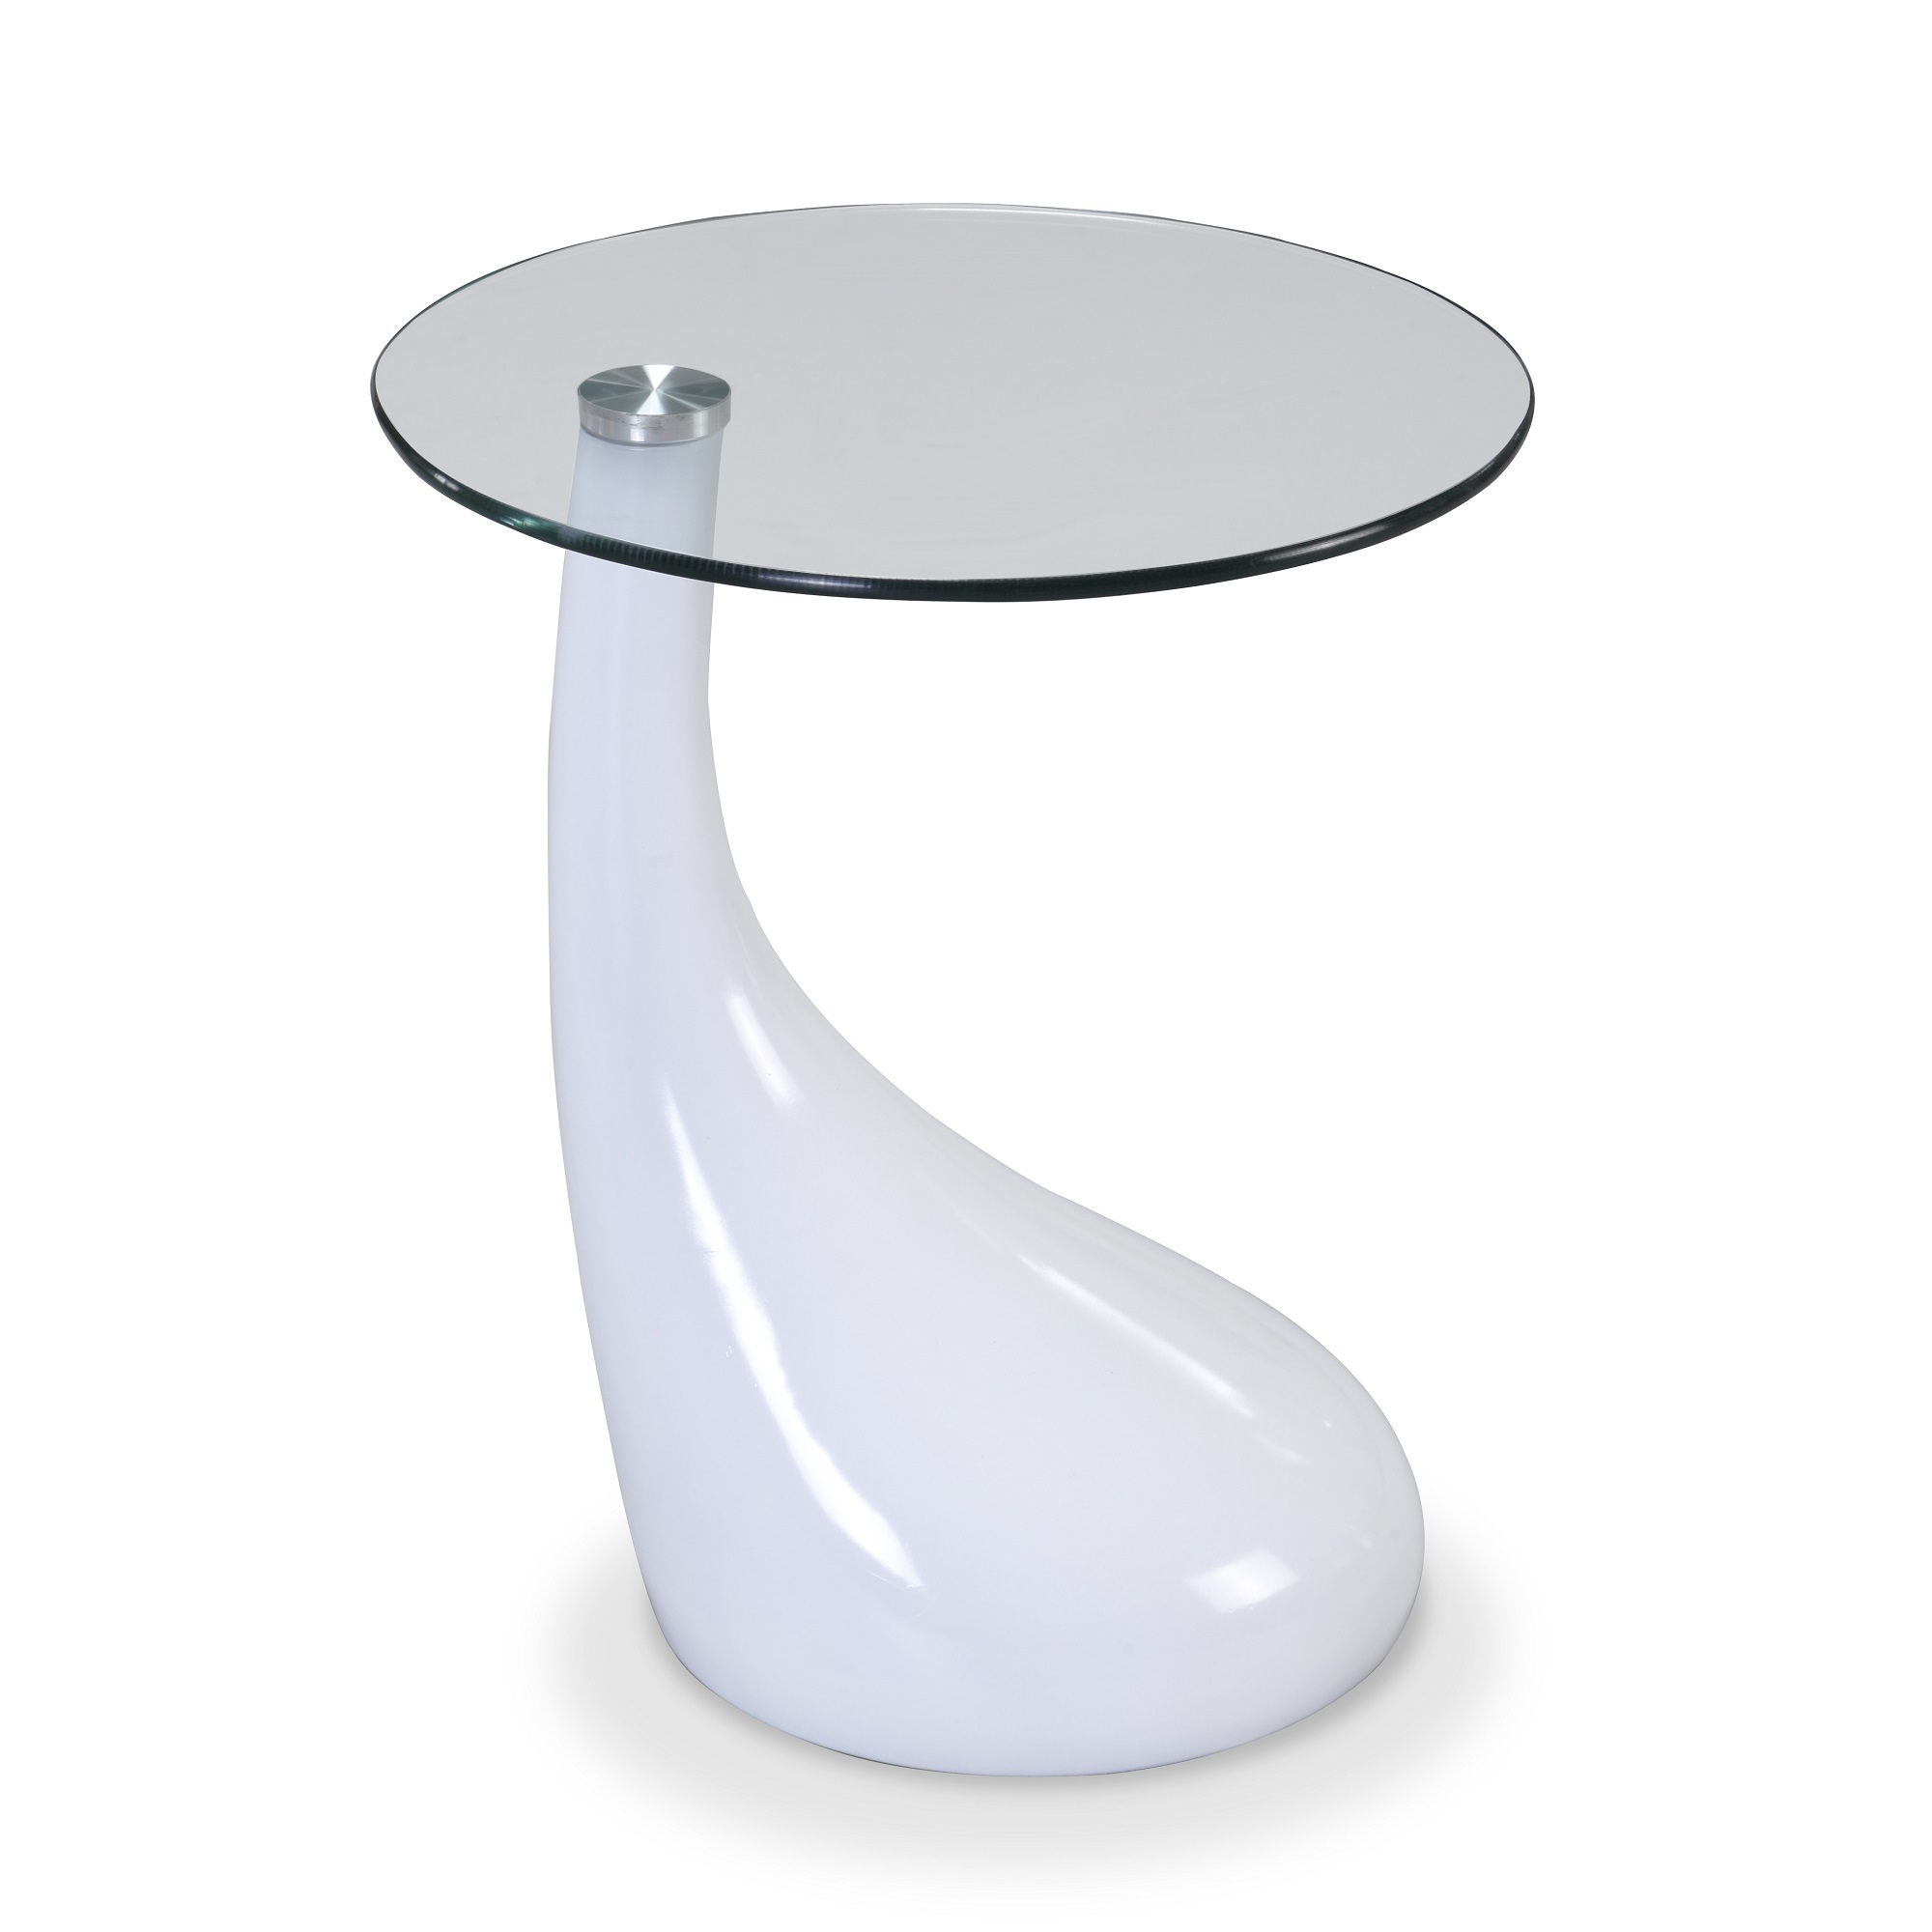 Manhattan Comfort, Lava 19.7Inch White Glass Top Accent Table, Width 19.7 in, Height 20.9 in, Depth 19.7 in, Model ET003